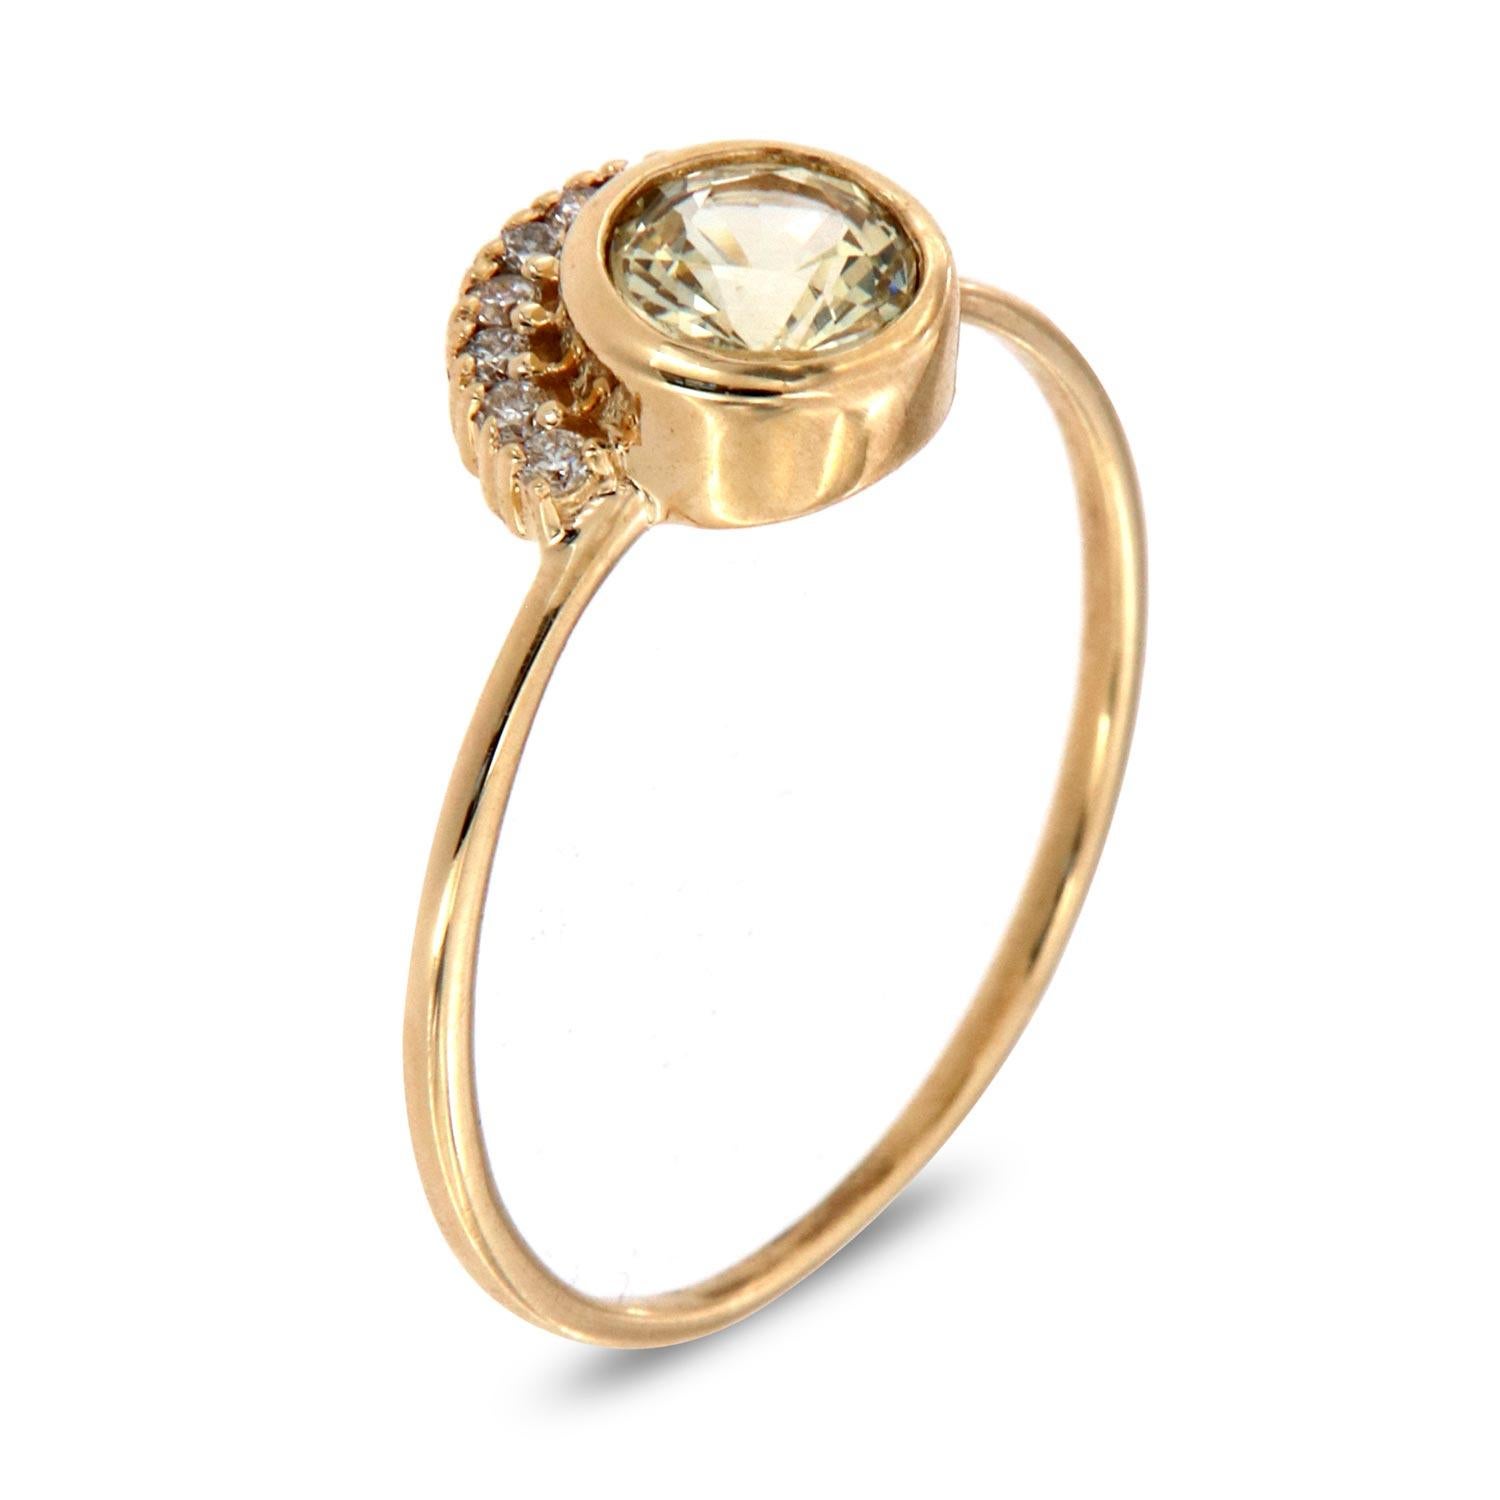 This petite fashion ring is impressive in its vintage appeal, featuring a bezeled natural yellowish round brilliant sapphire, accented with round brilliant diamonds. Experience the difference in person!

Product details: 

Center Gemstone Type: